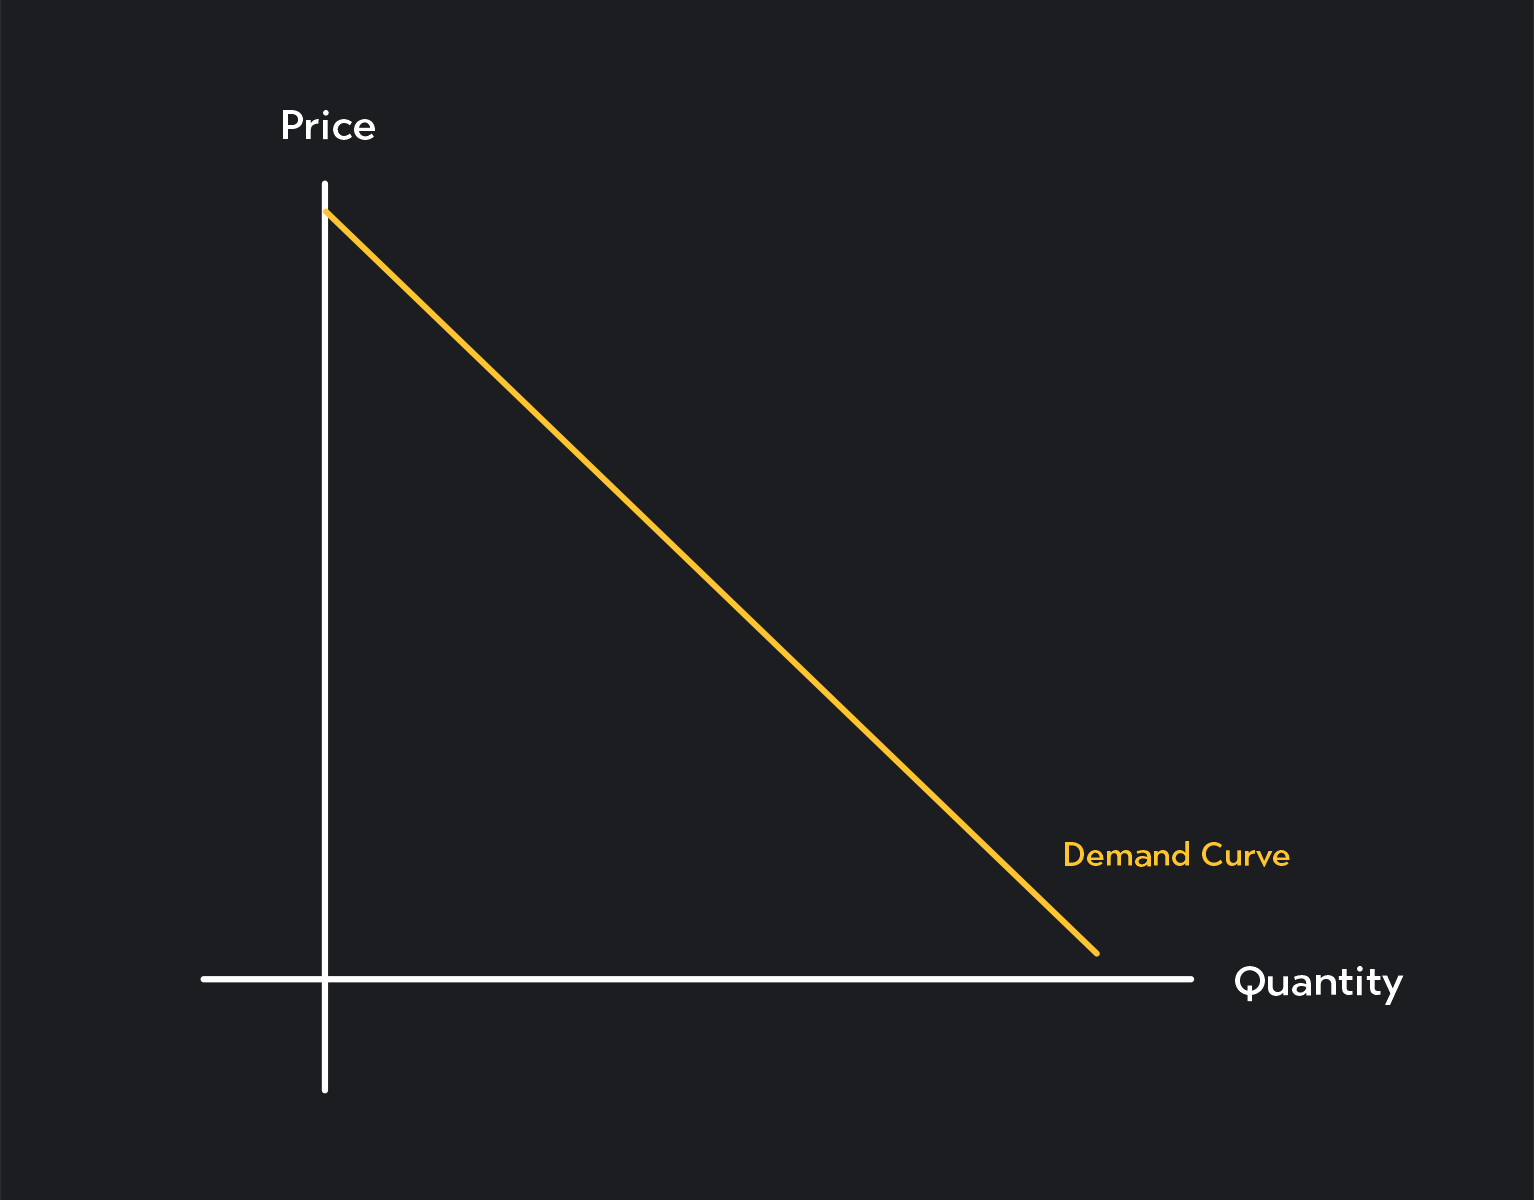 Graph showing the demand curve